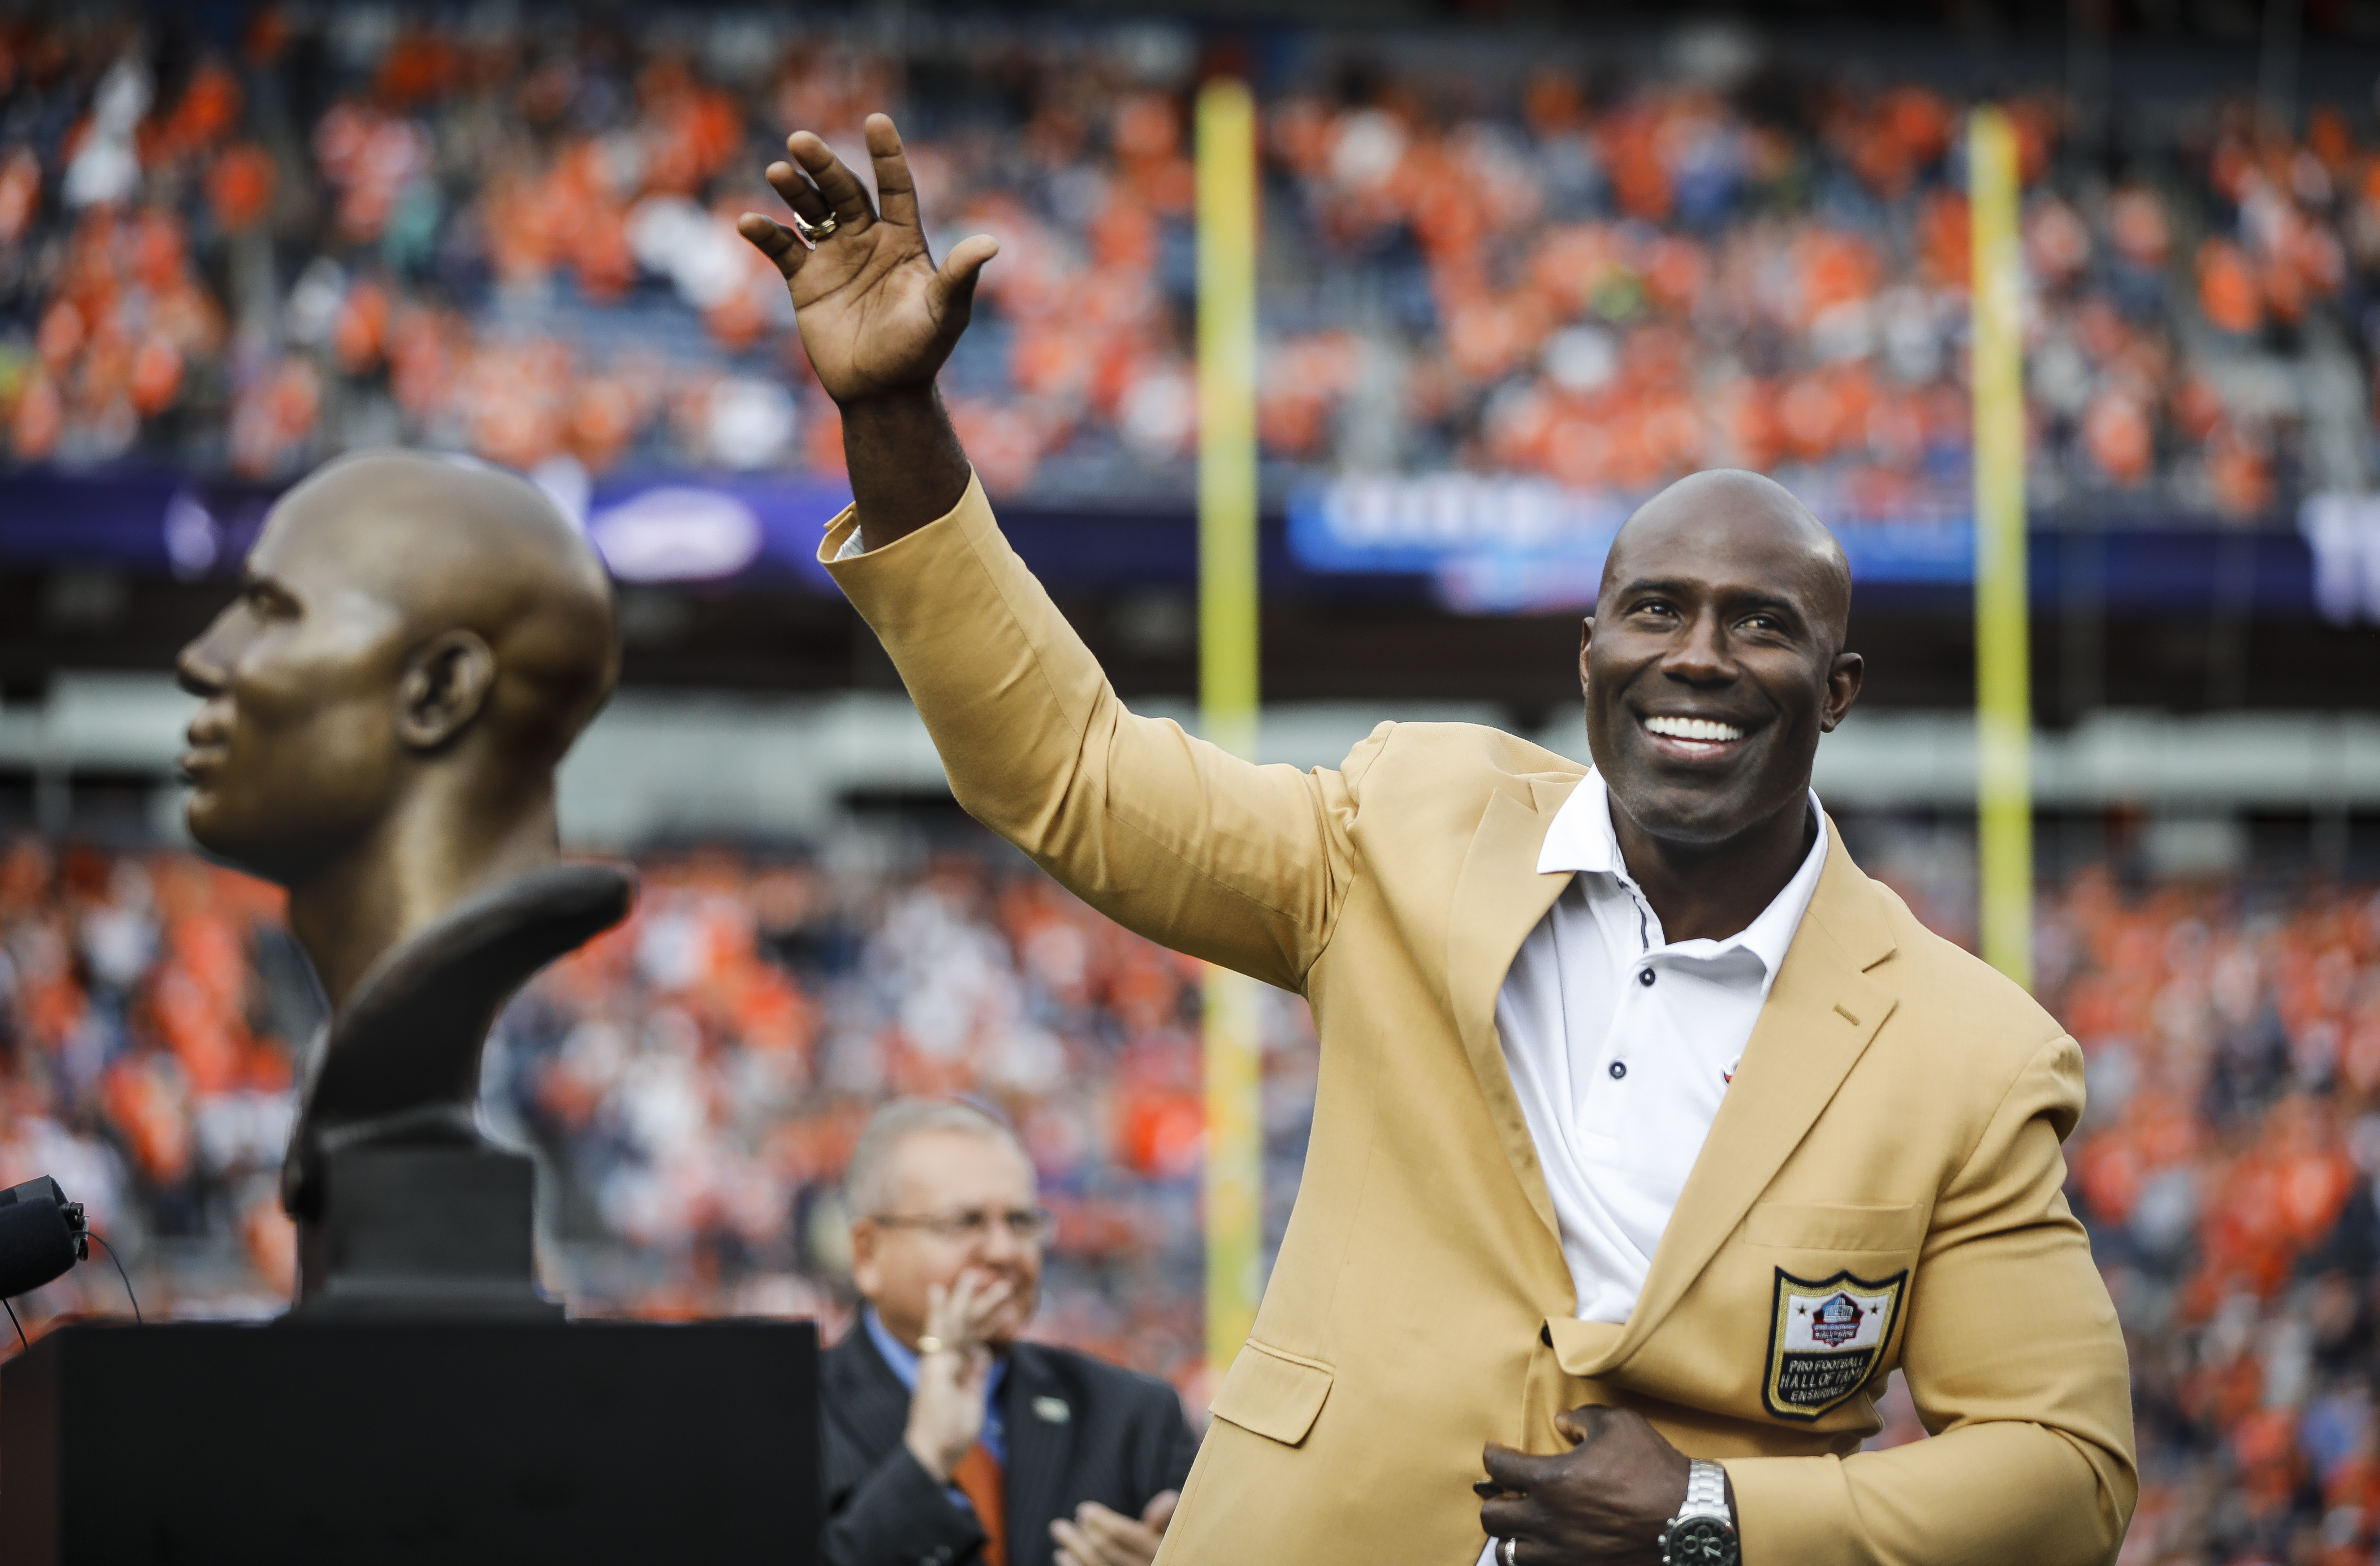 The Broncos honor former NFL running back Terrell Davis before a game